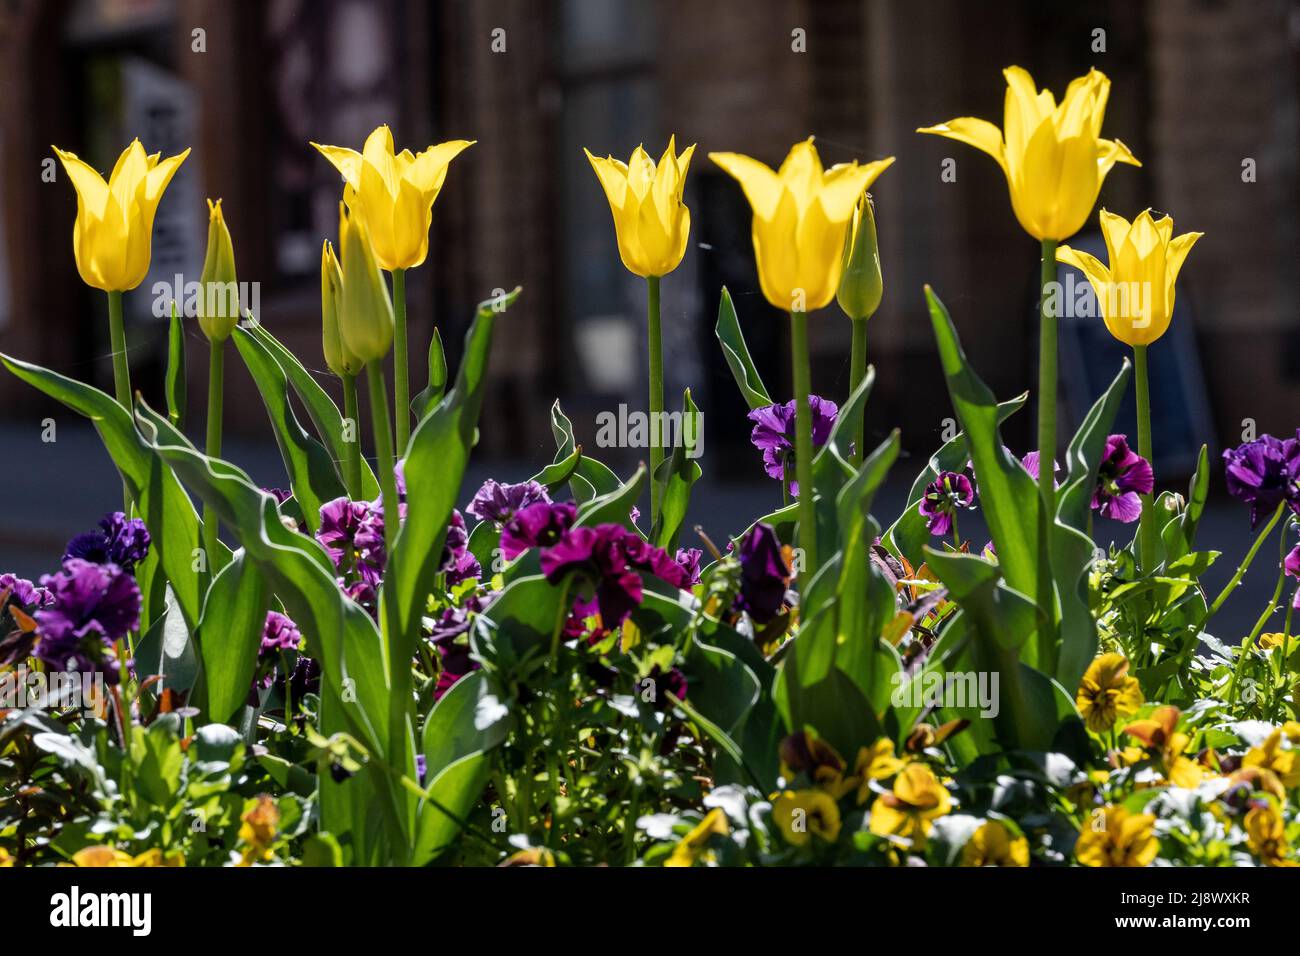 Yellow tulips and purple pansies in a flowerbed on main street Drottninggatan in Norrköping during spring in Sweden. Stock Photo